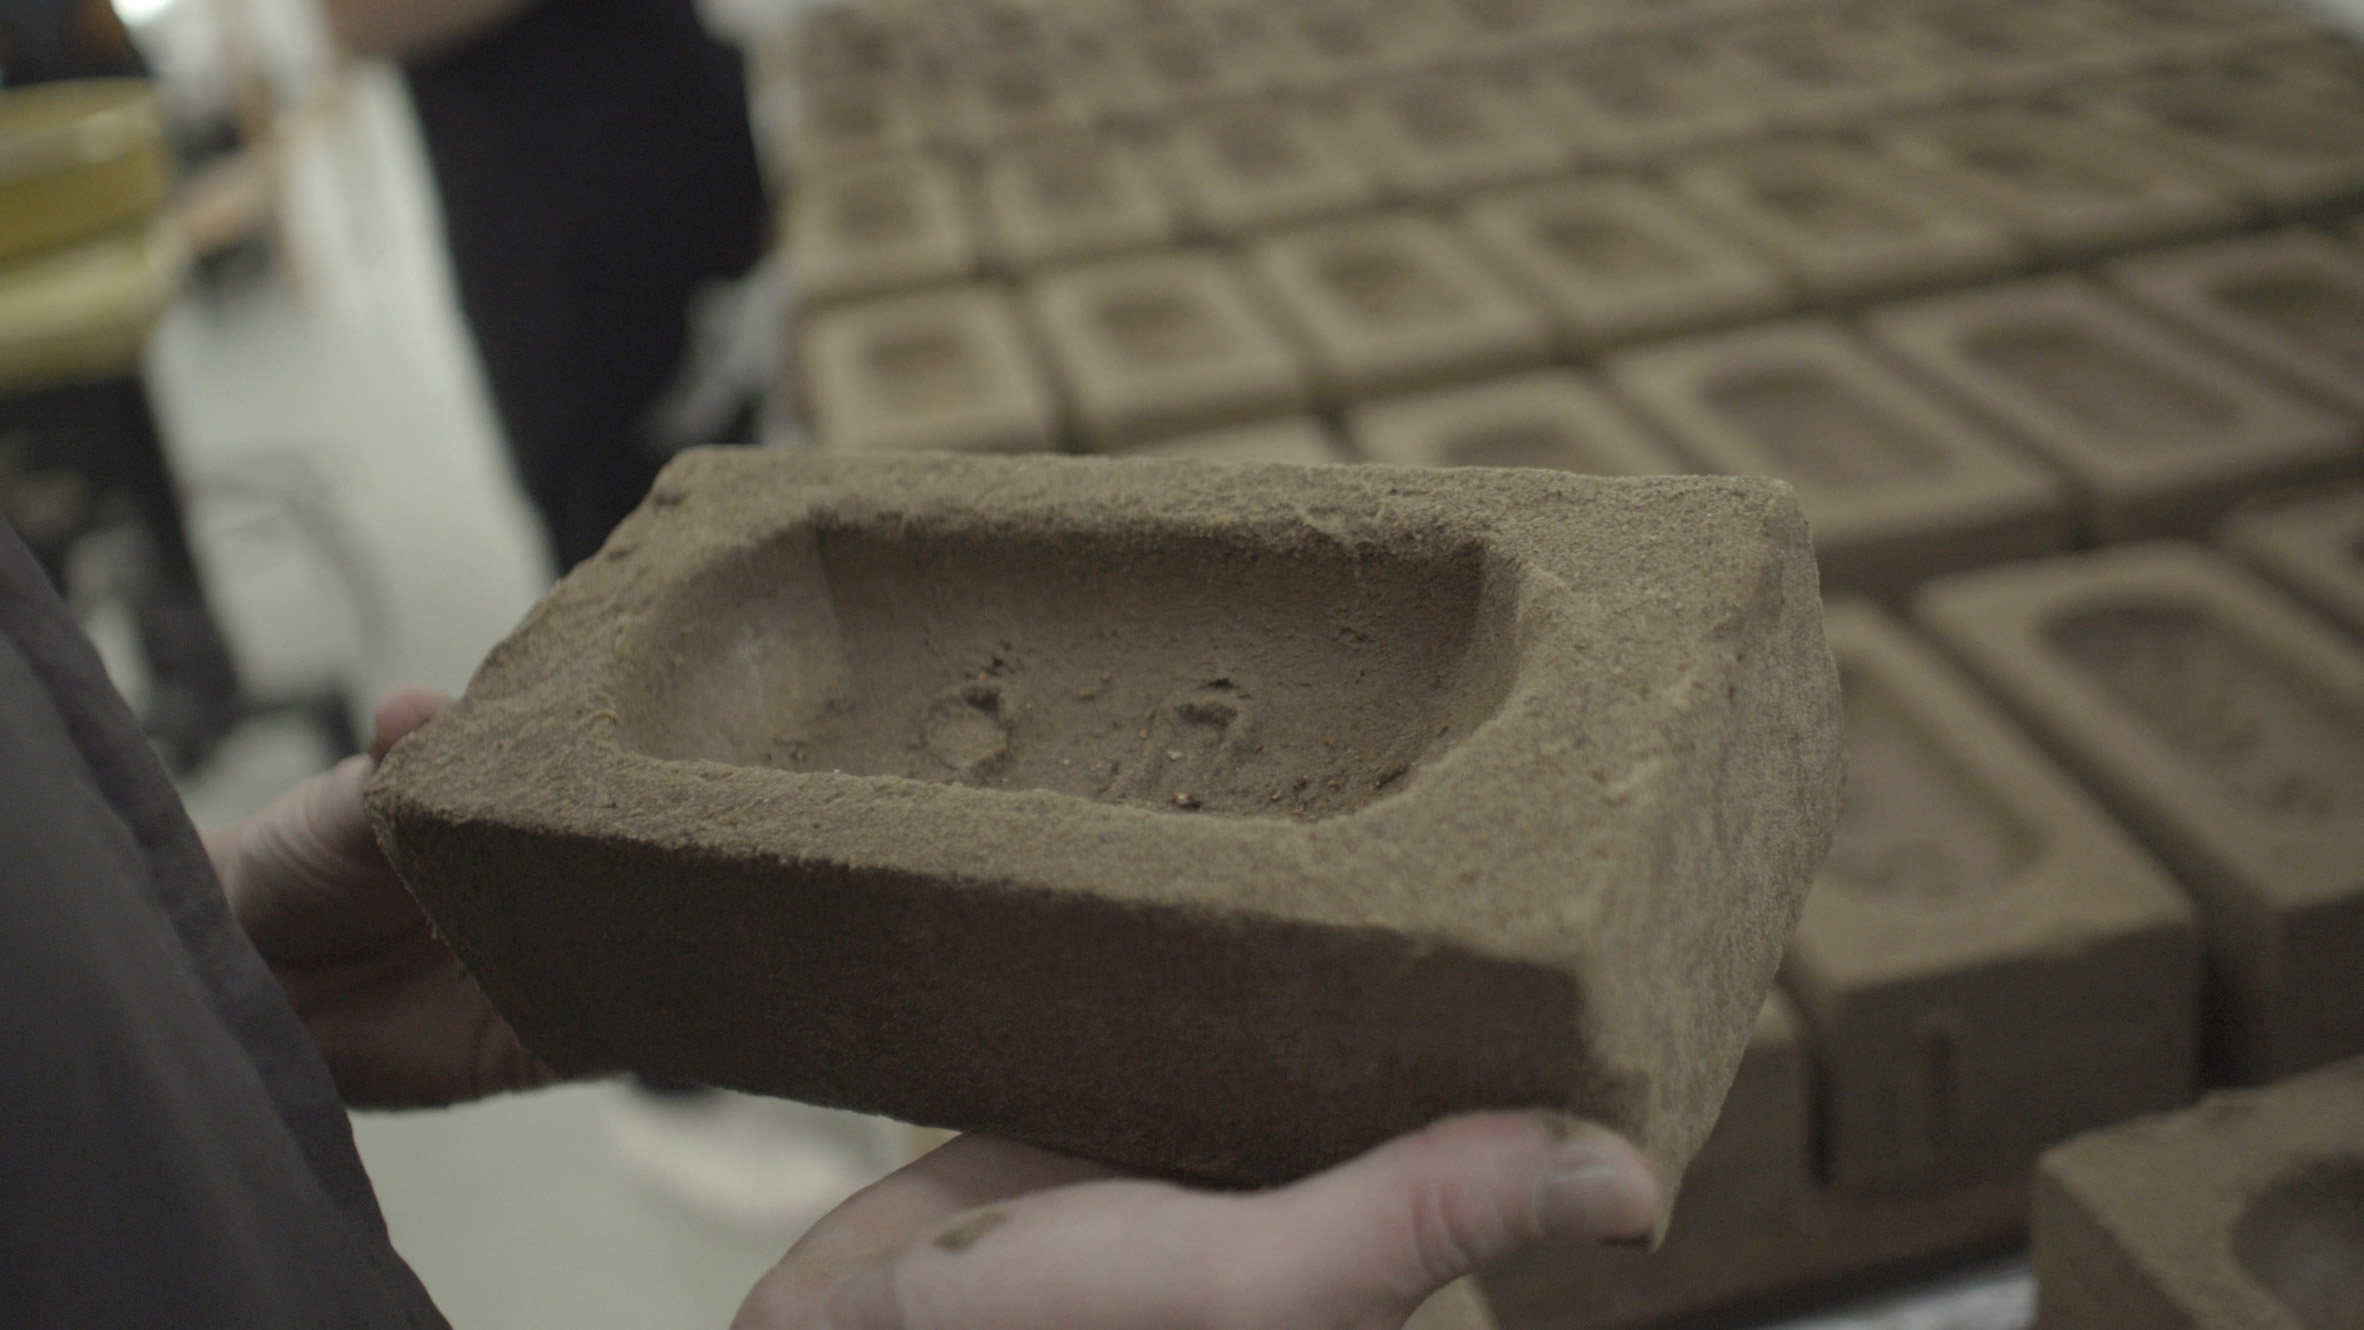 Atelier NL sources clay from London brick manufacturer for Dezeen Awards trophy